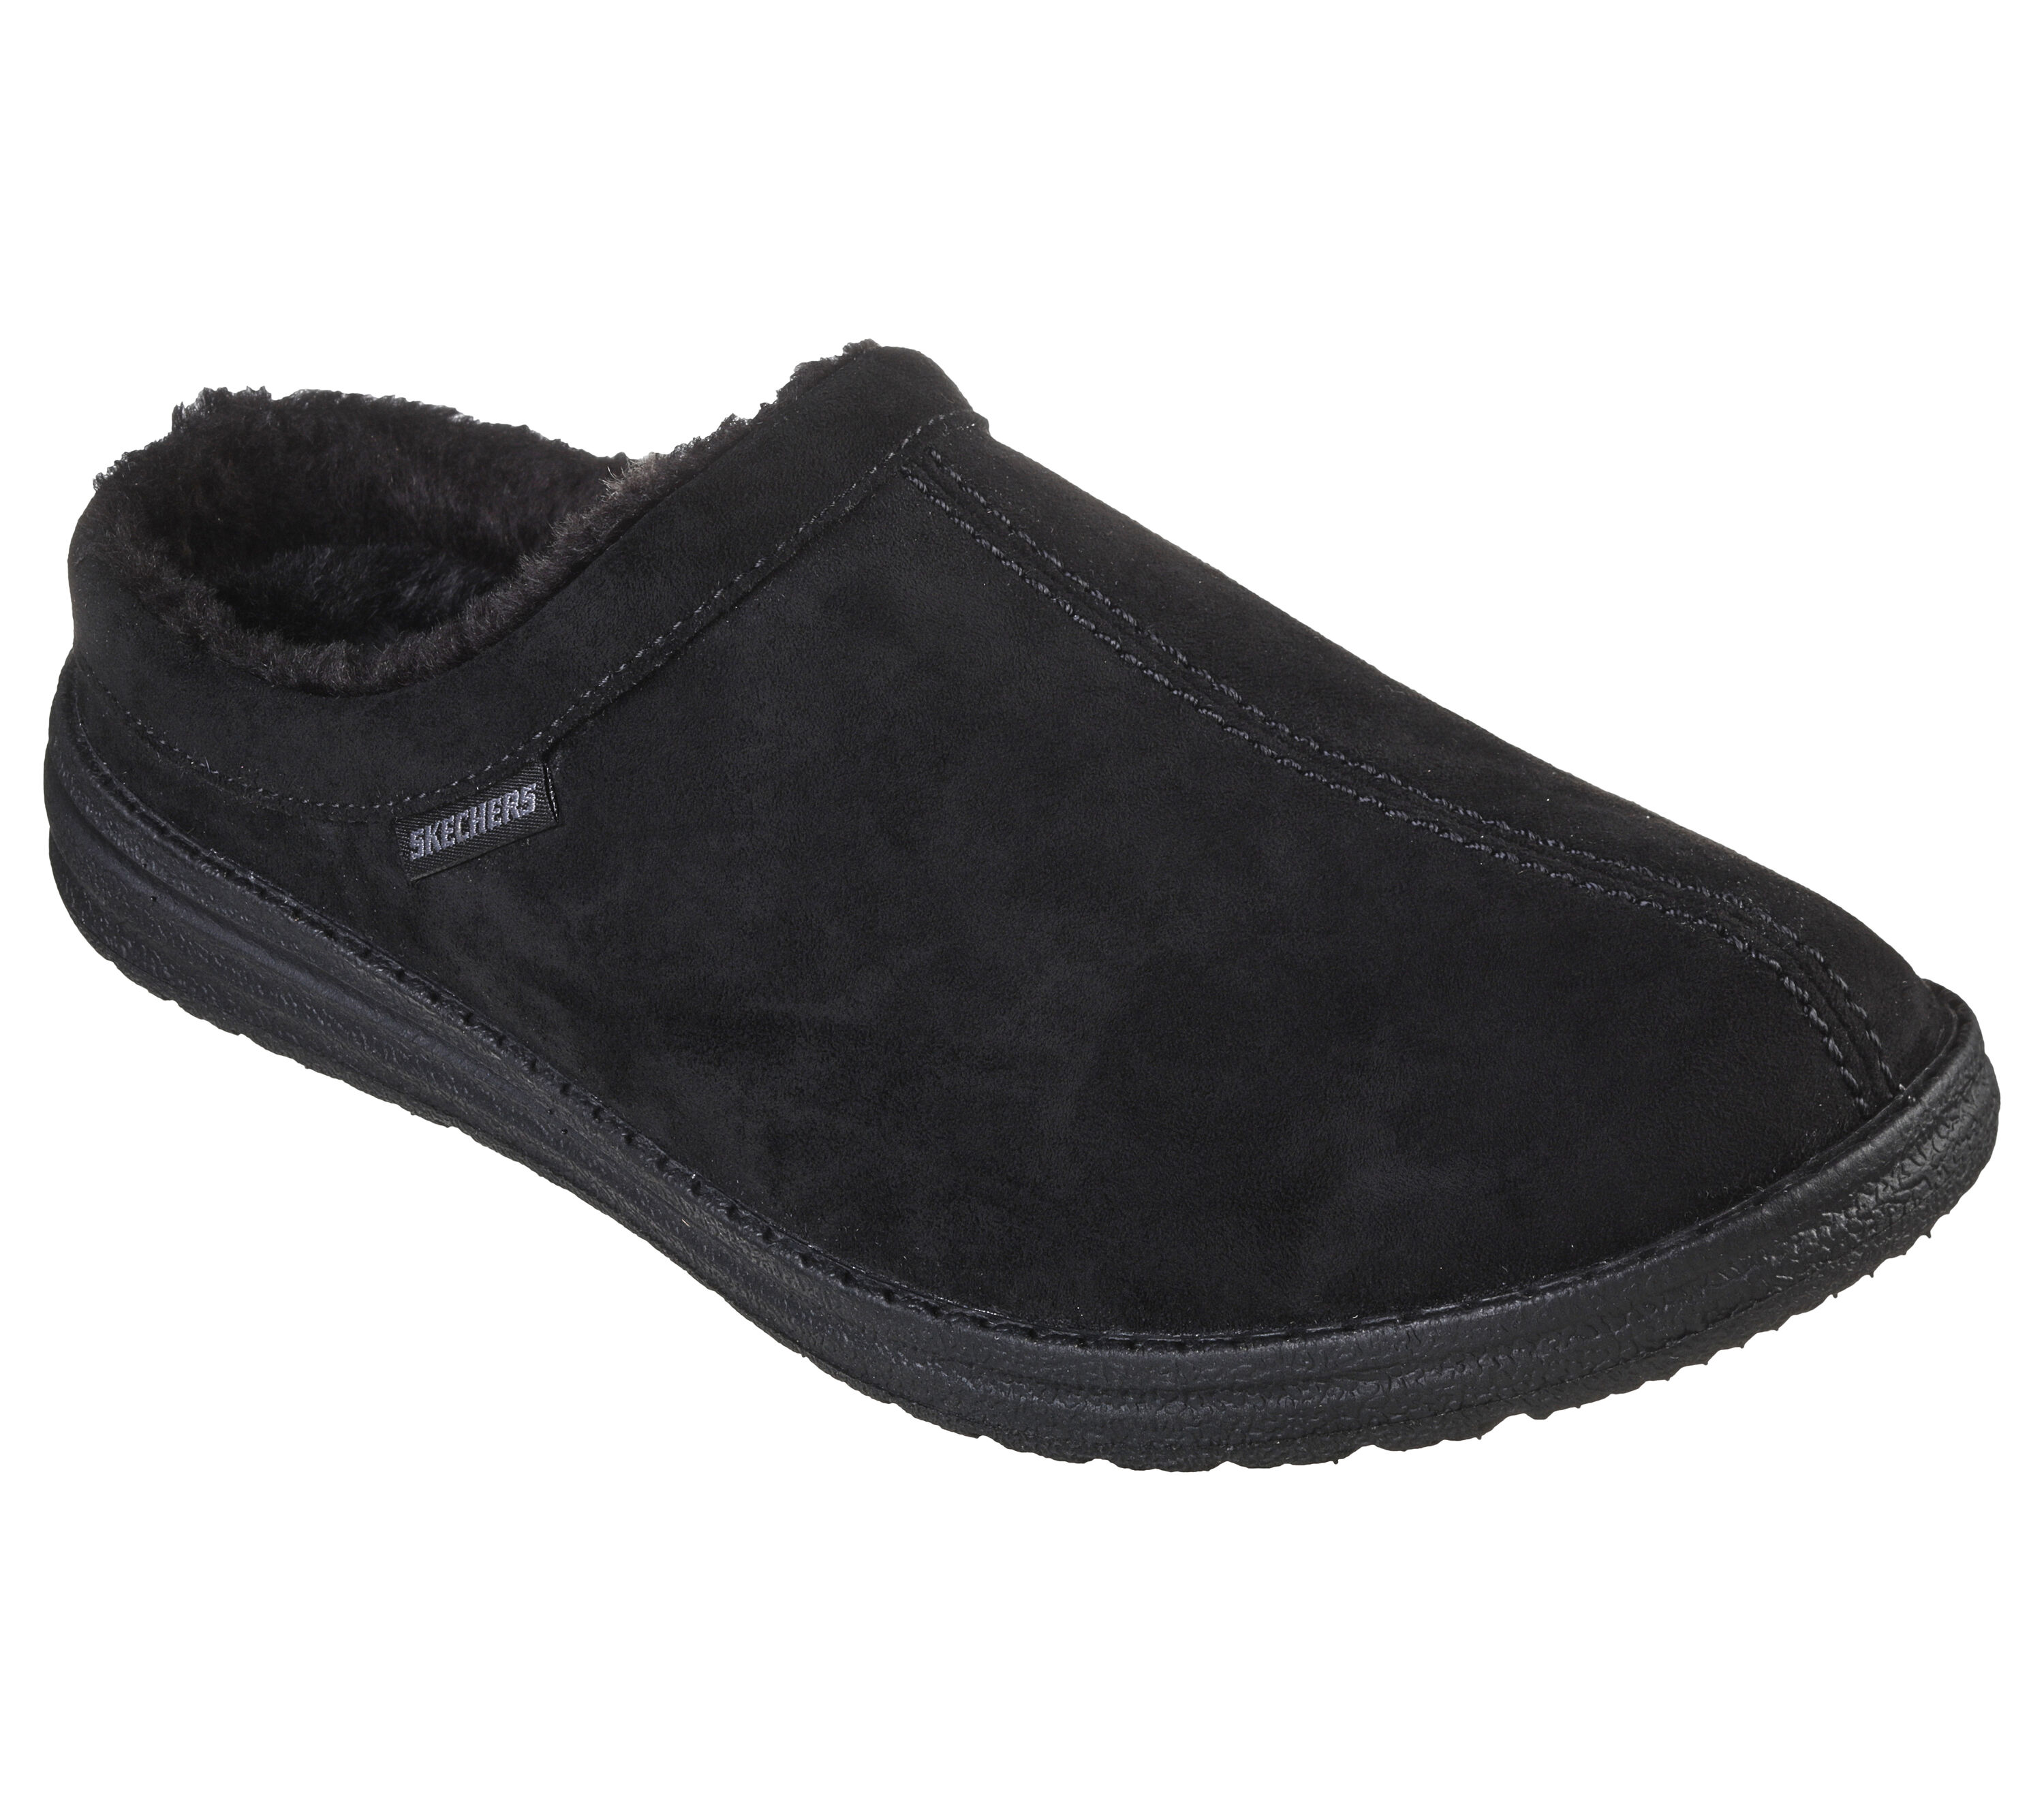 Shop the Relaxed Fit: Melson - Harmen | SKECHERS CA